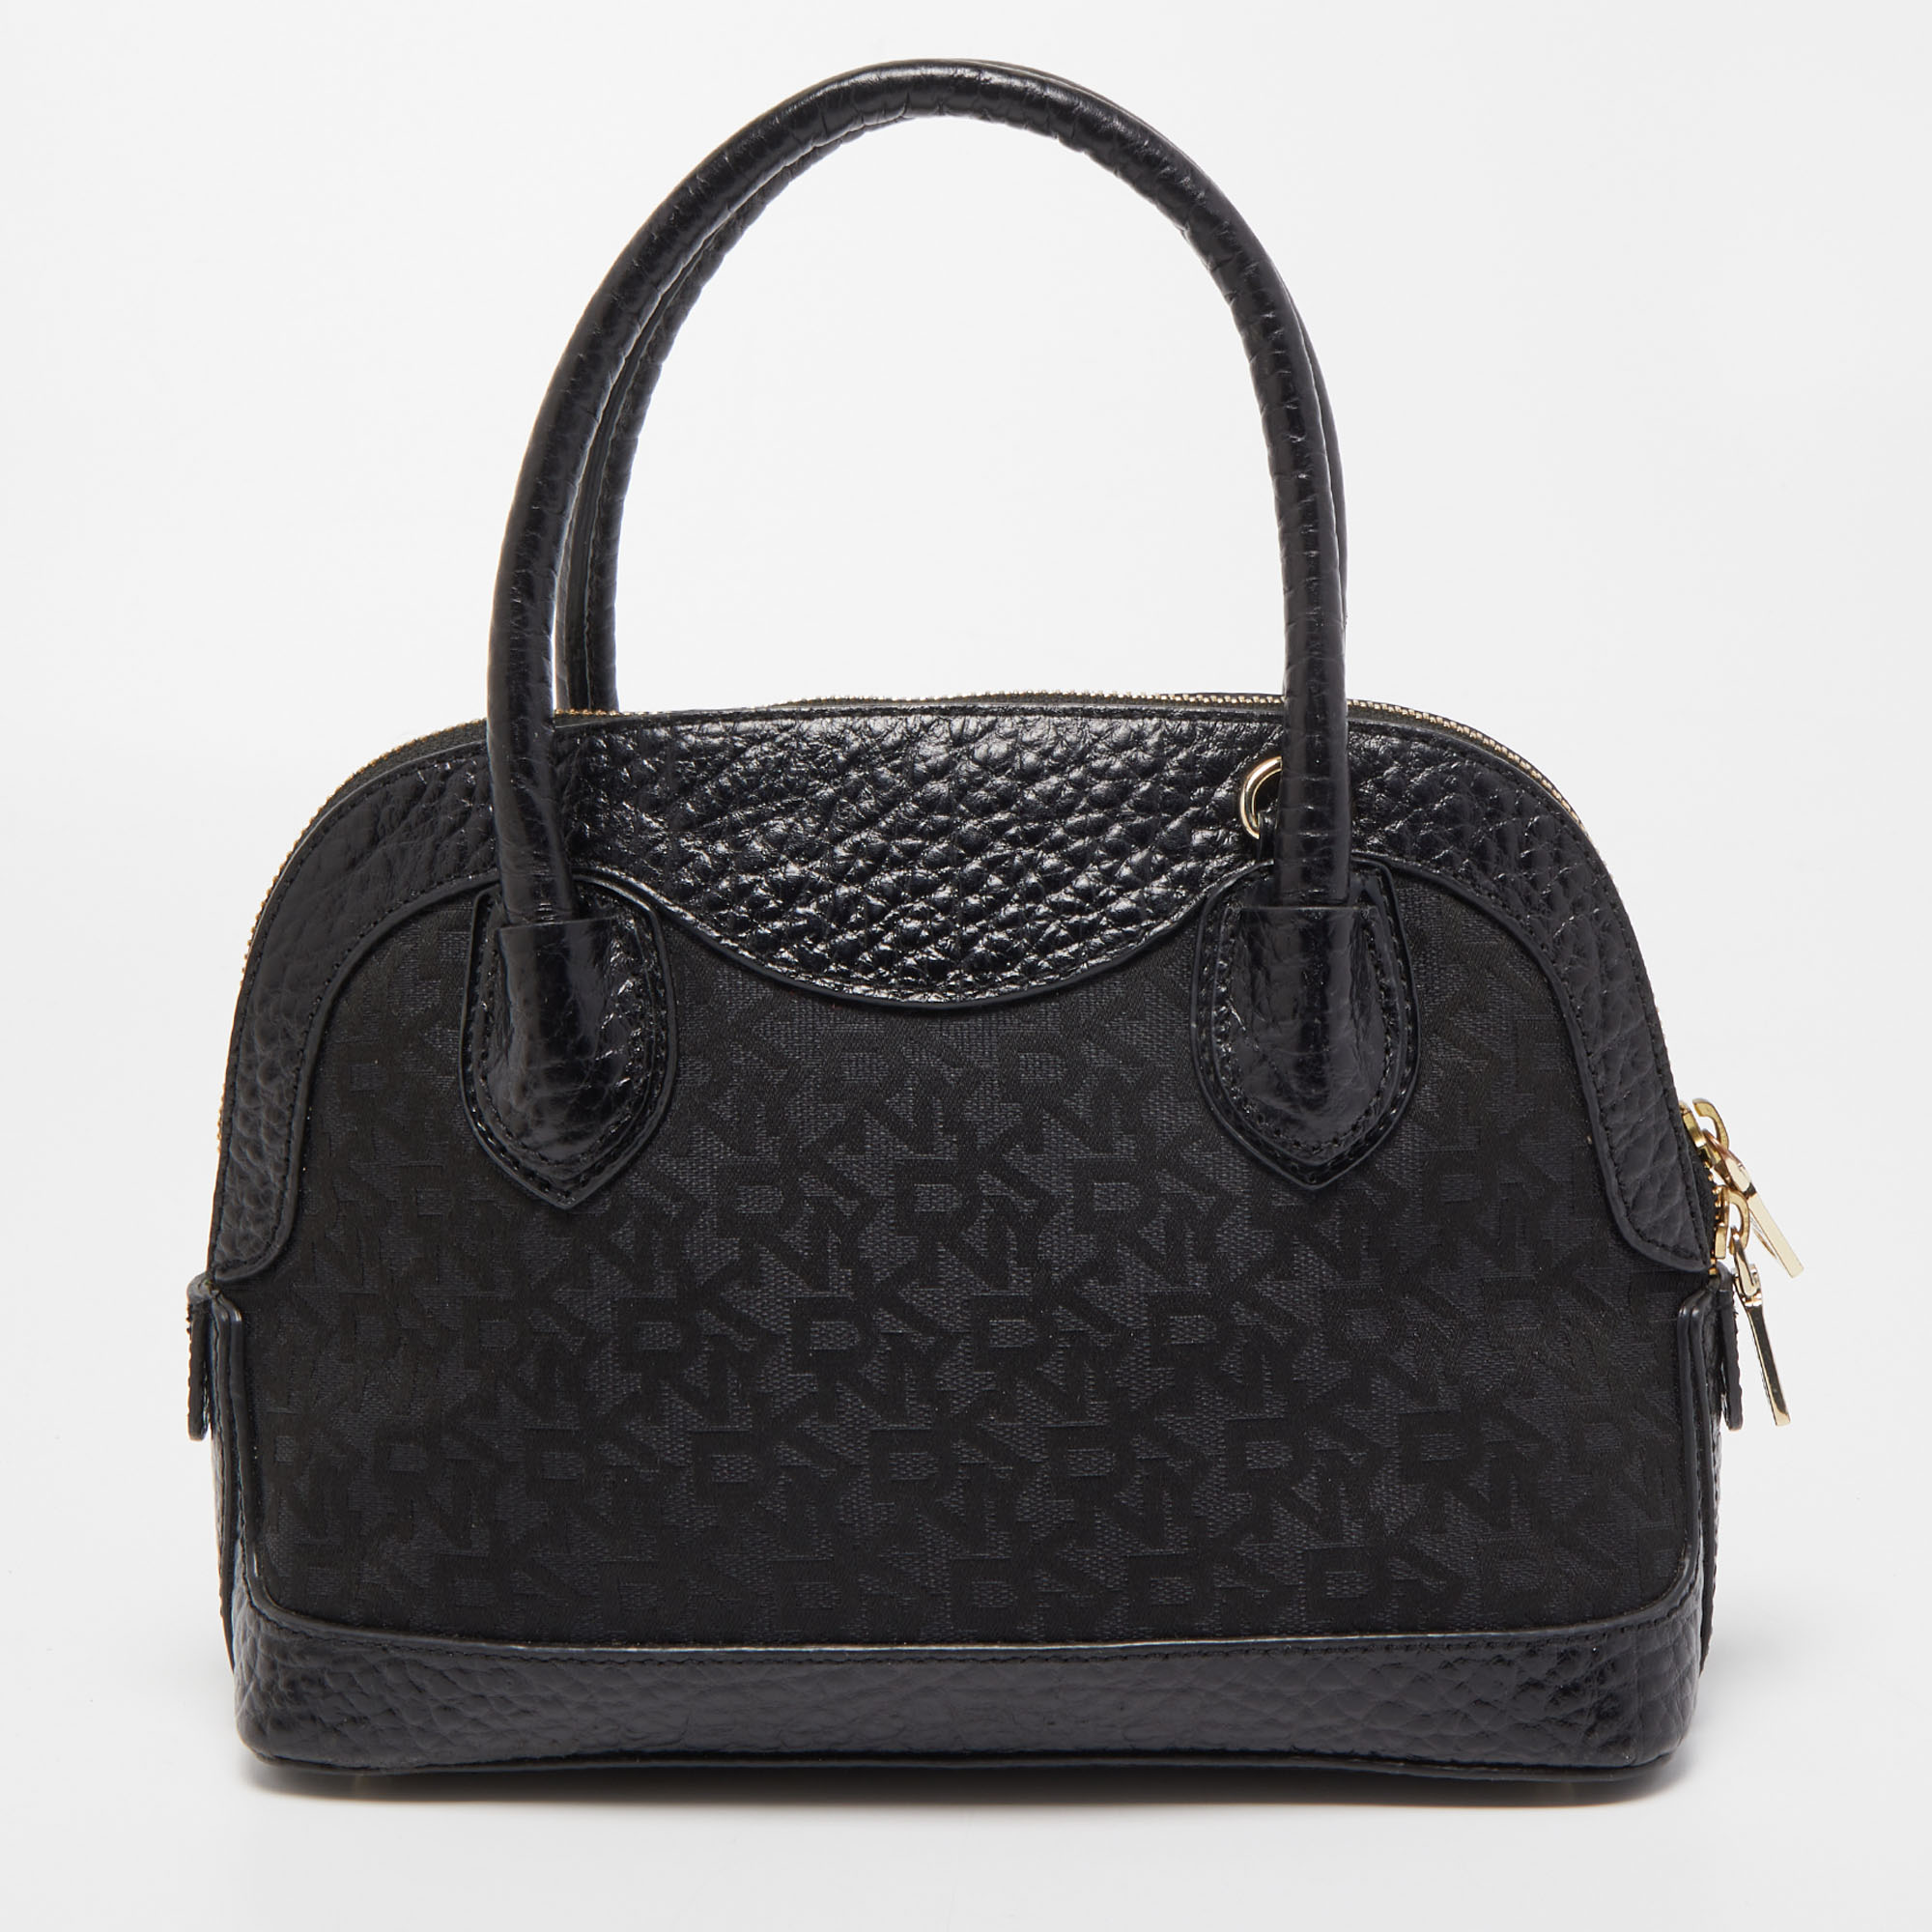 Dkny Grey/Black Monogram Canvas And Leather Dome Satchel